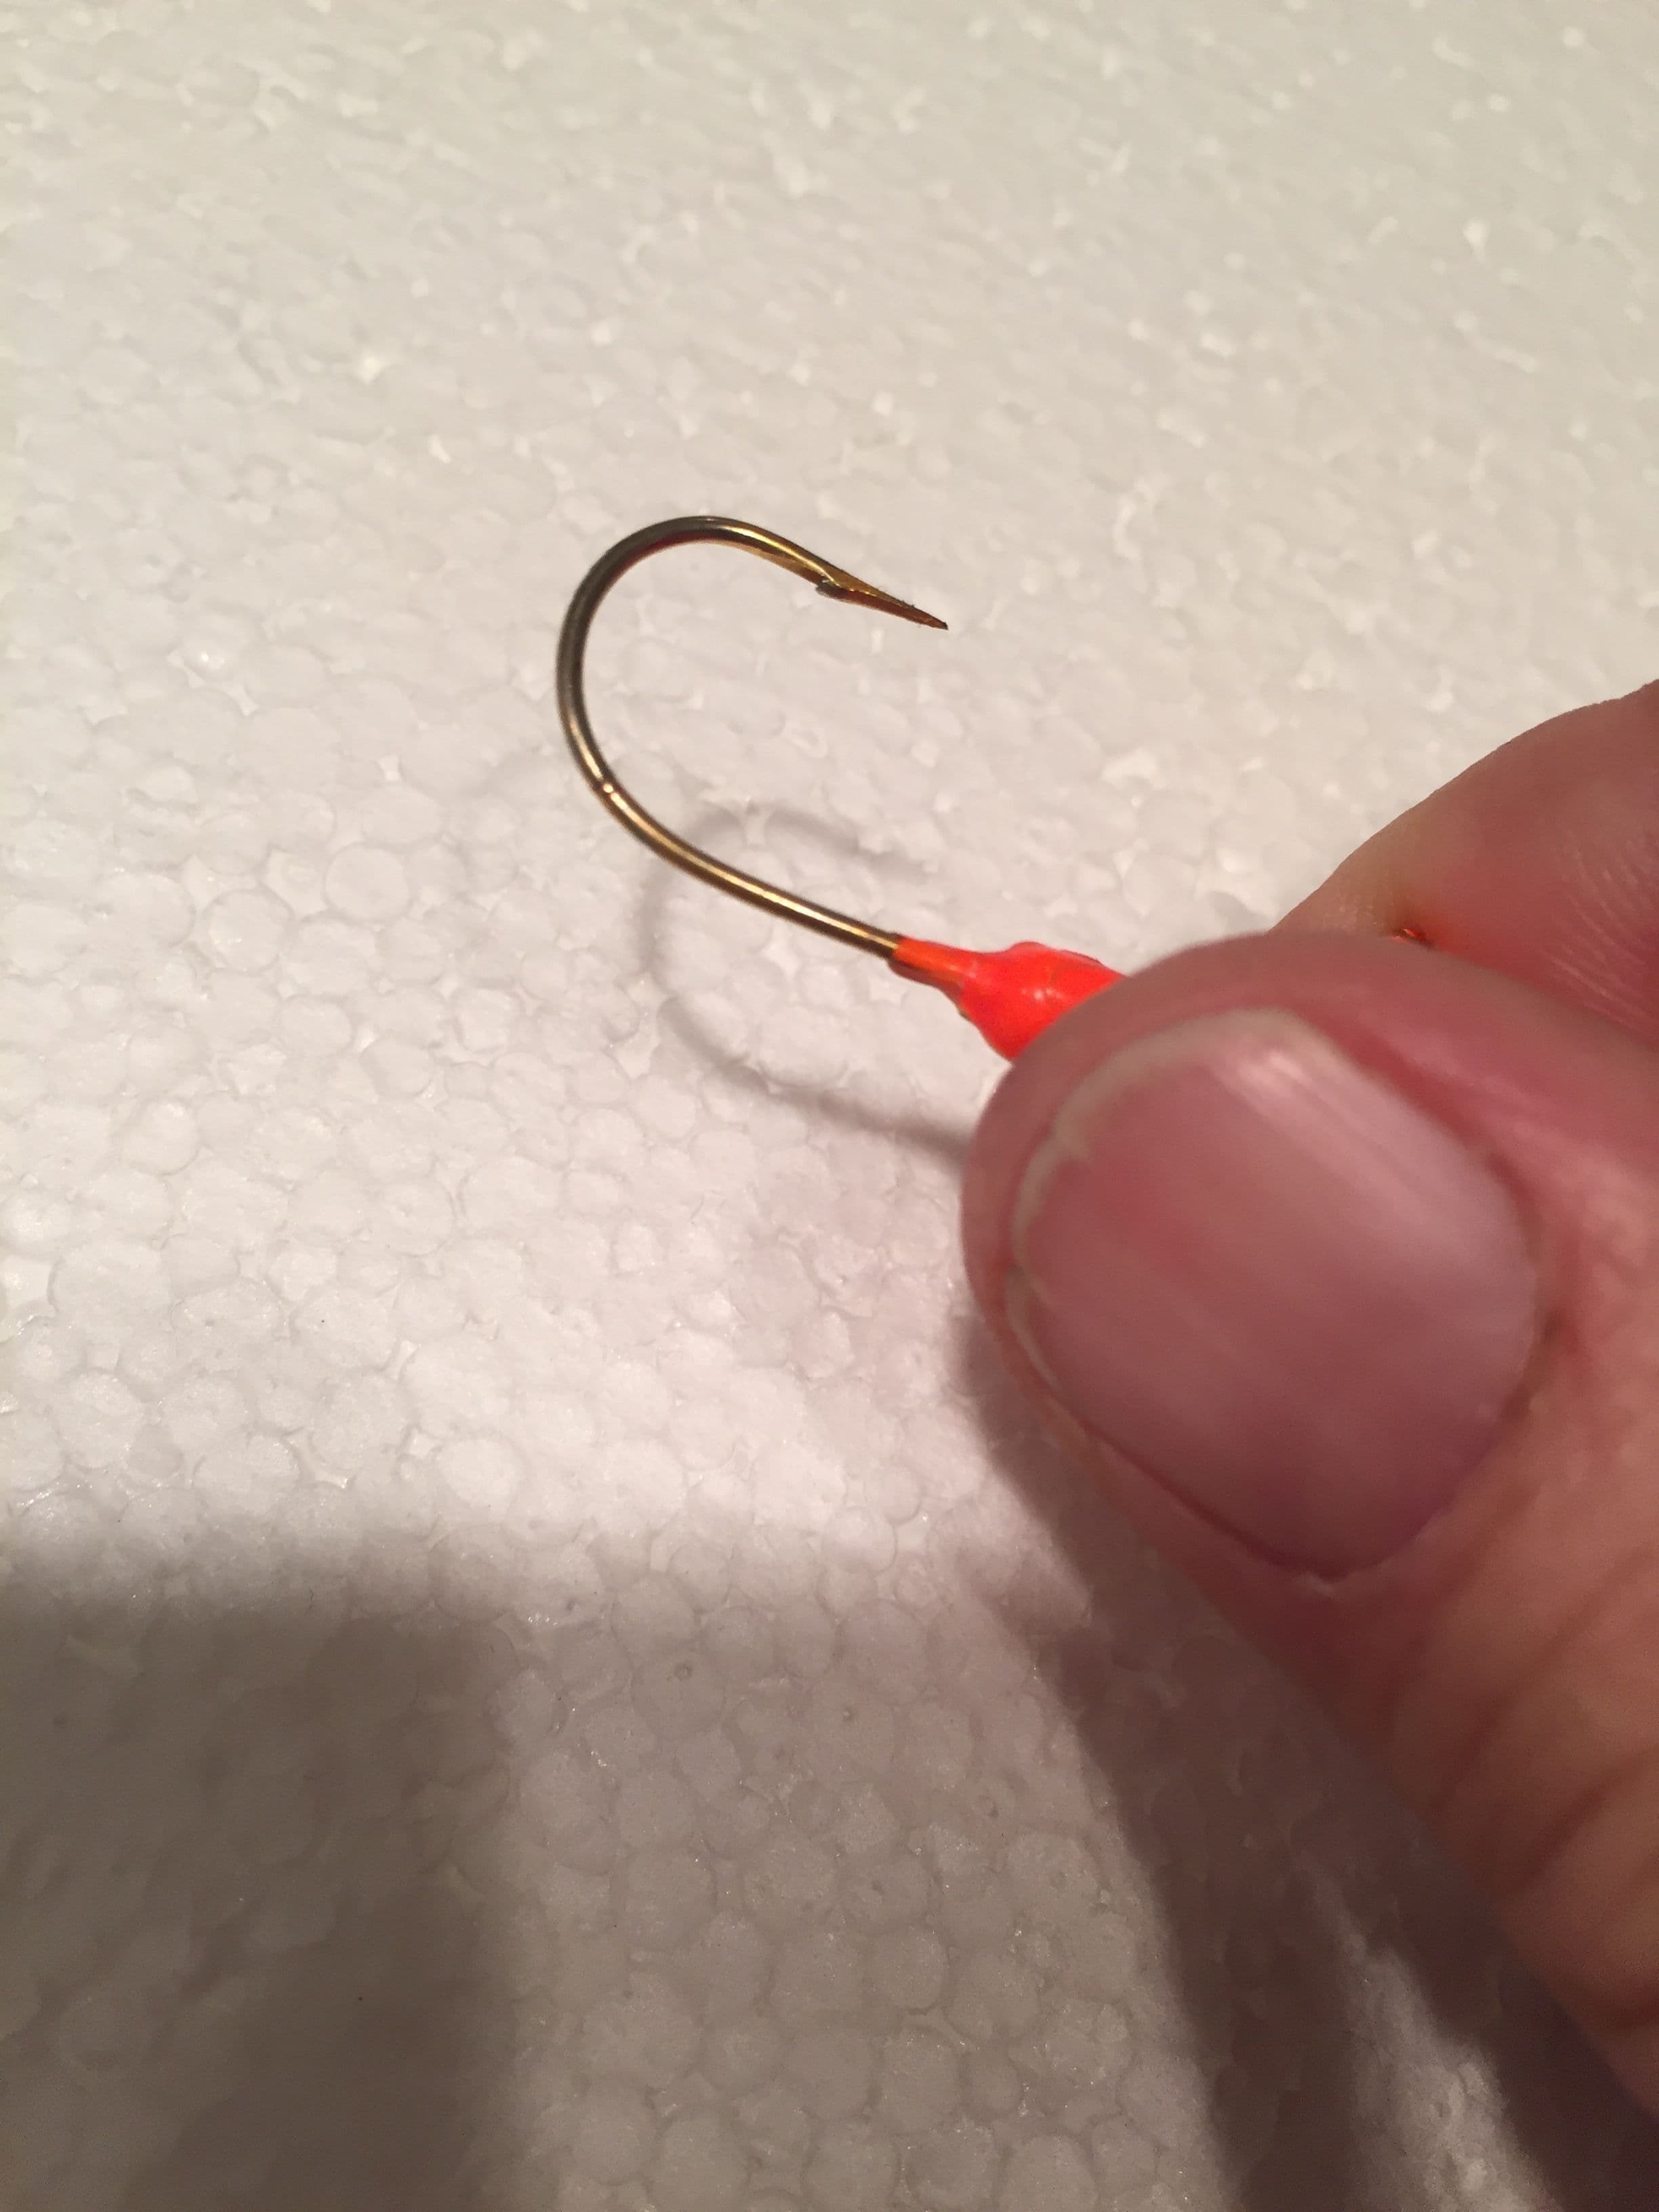 Why are Fisherman Required to Use Barbless Hooks?